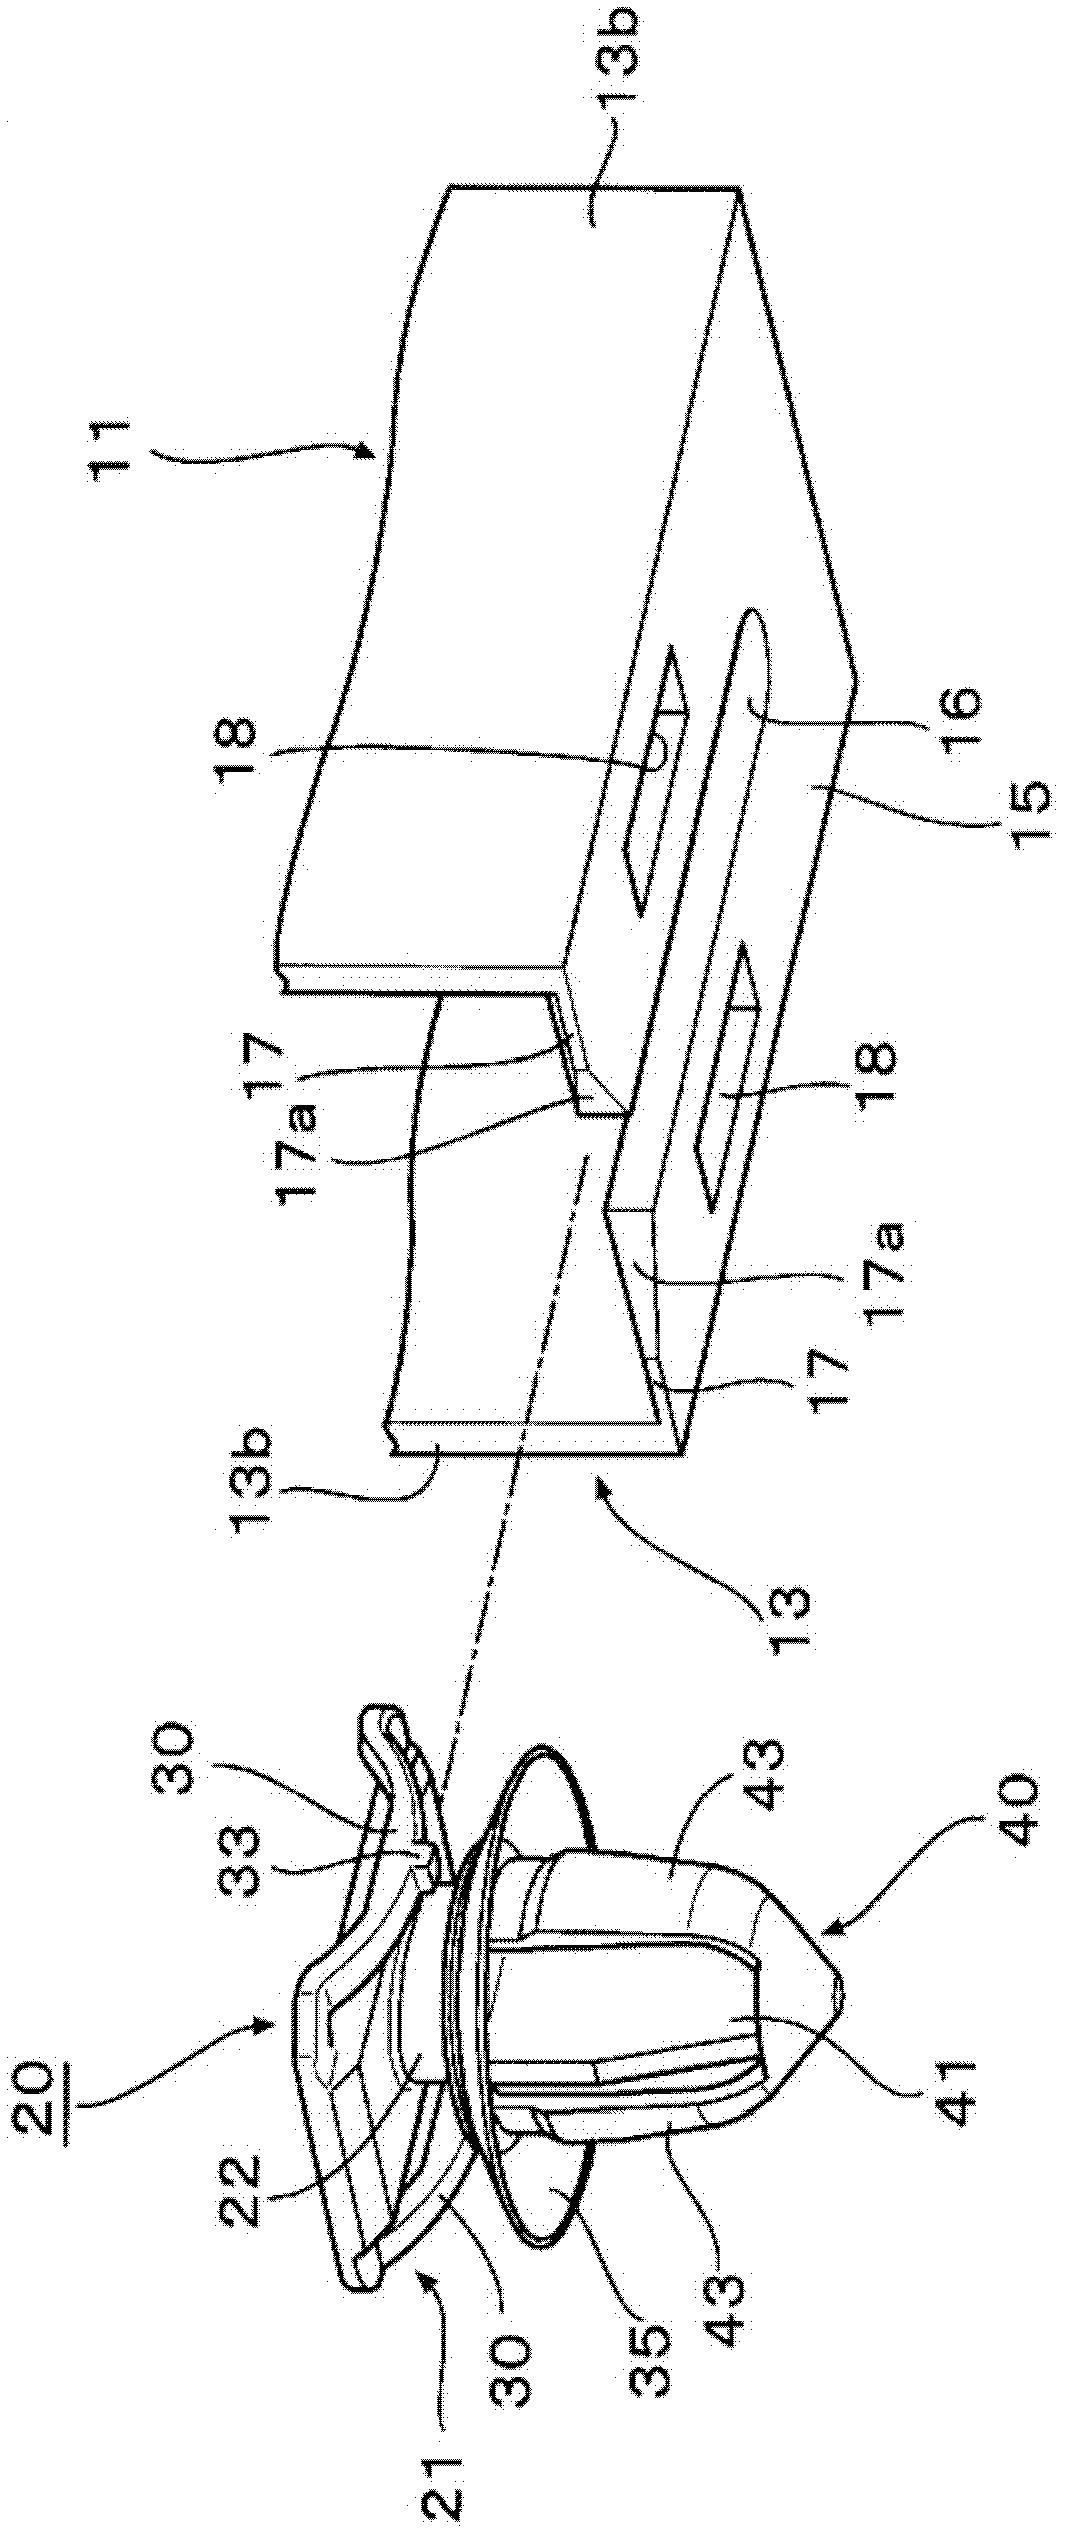 Installation structure for clip and attachment member